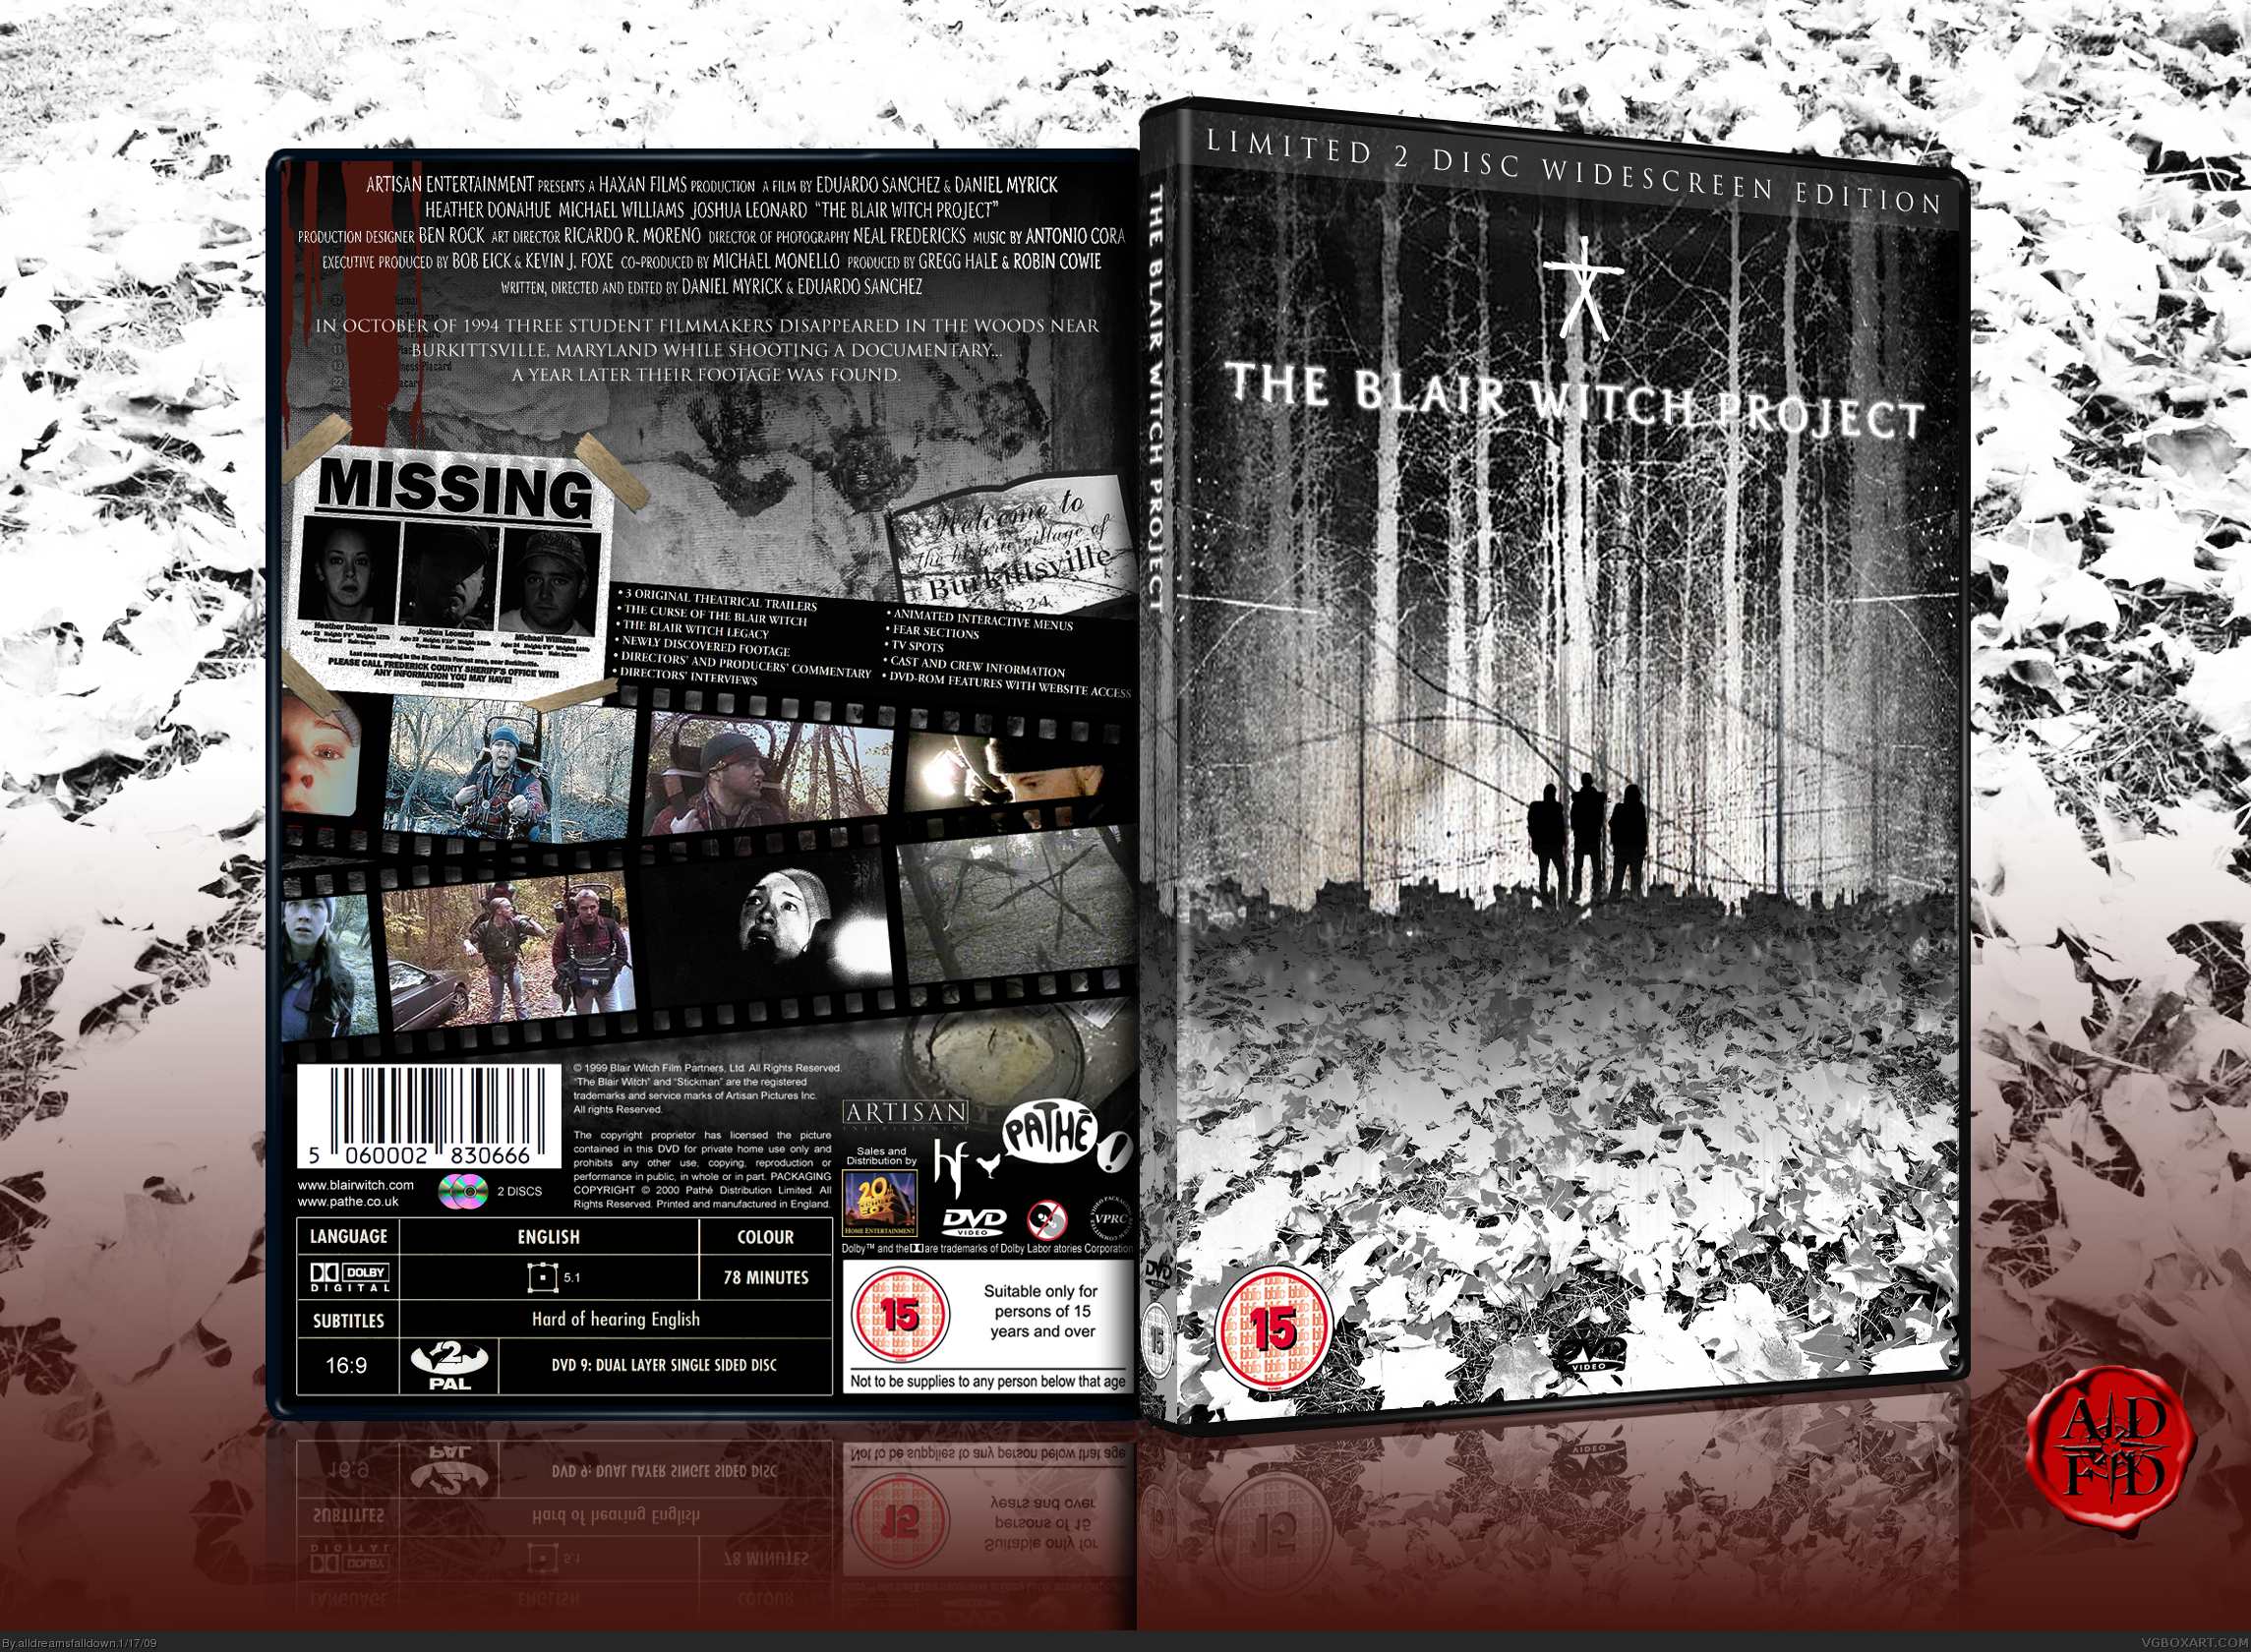 The Blair Witch Project box cover